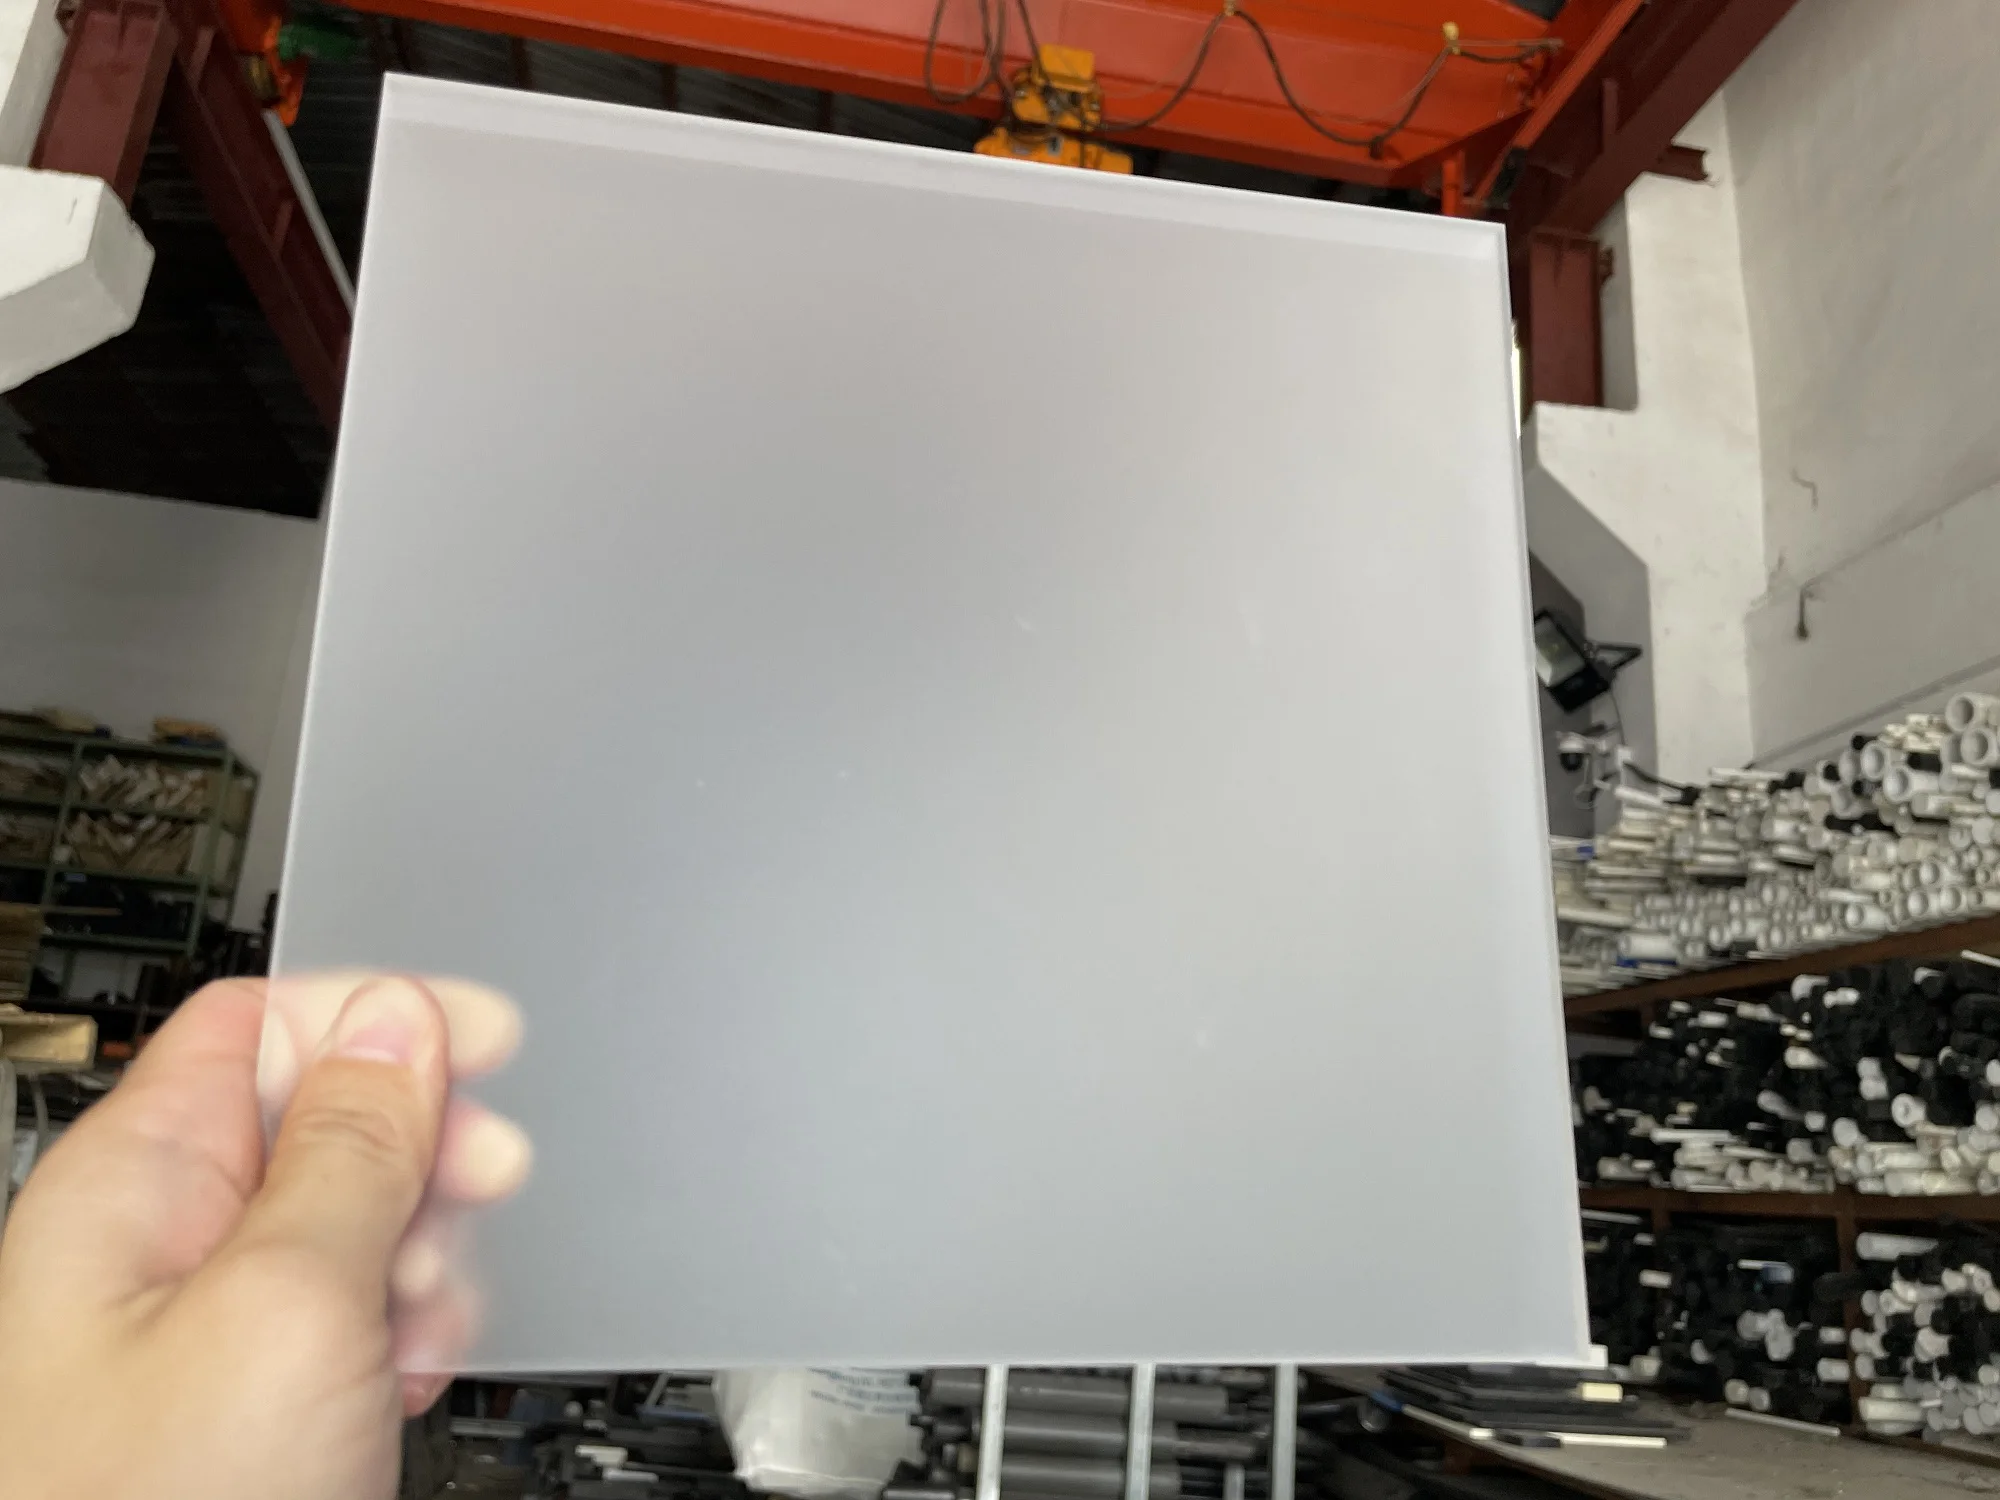 China Perspex Manufacture Cast 3mm 2mm Clear Acrylic Sheet/Perspex/Plexi  Glass Factory - China 3mm 2mm Clear Acrylic Sheet, Acrylic Sheet